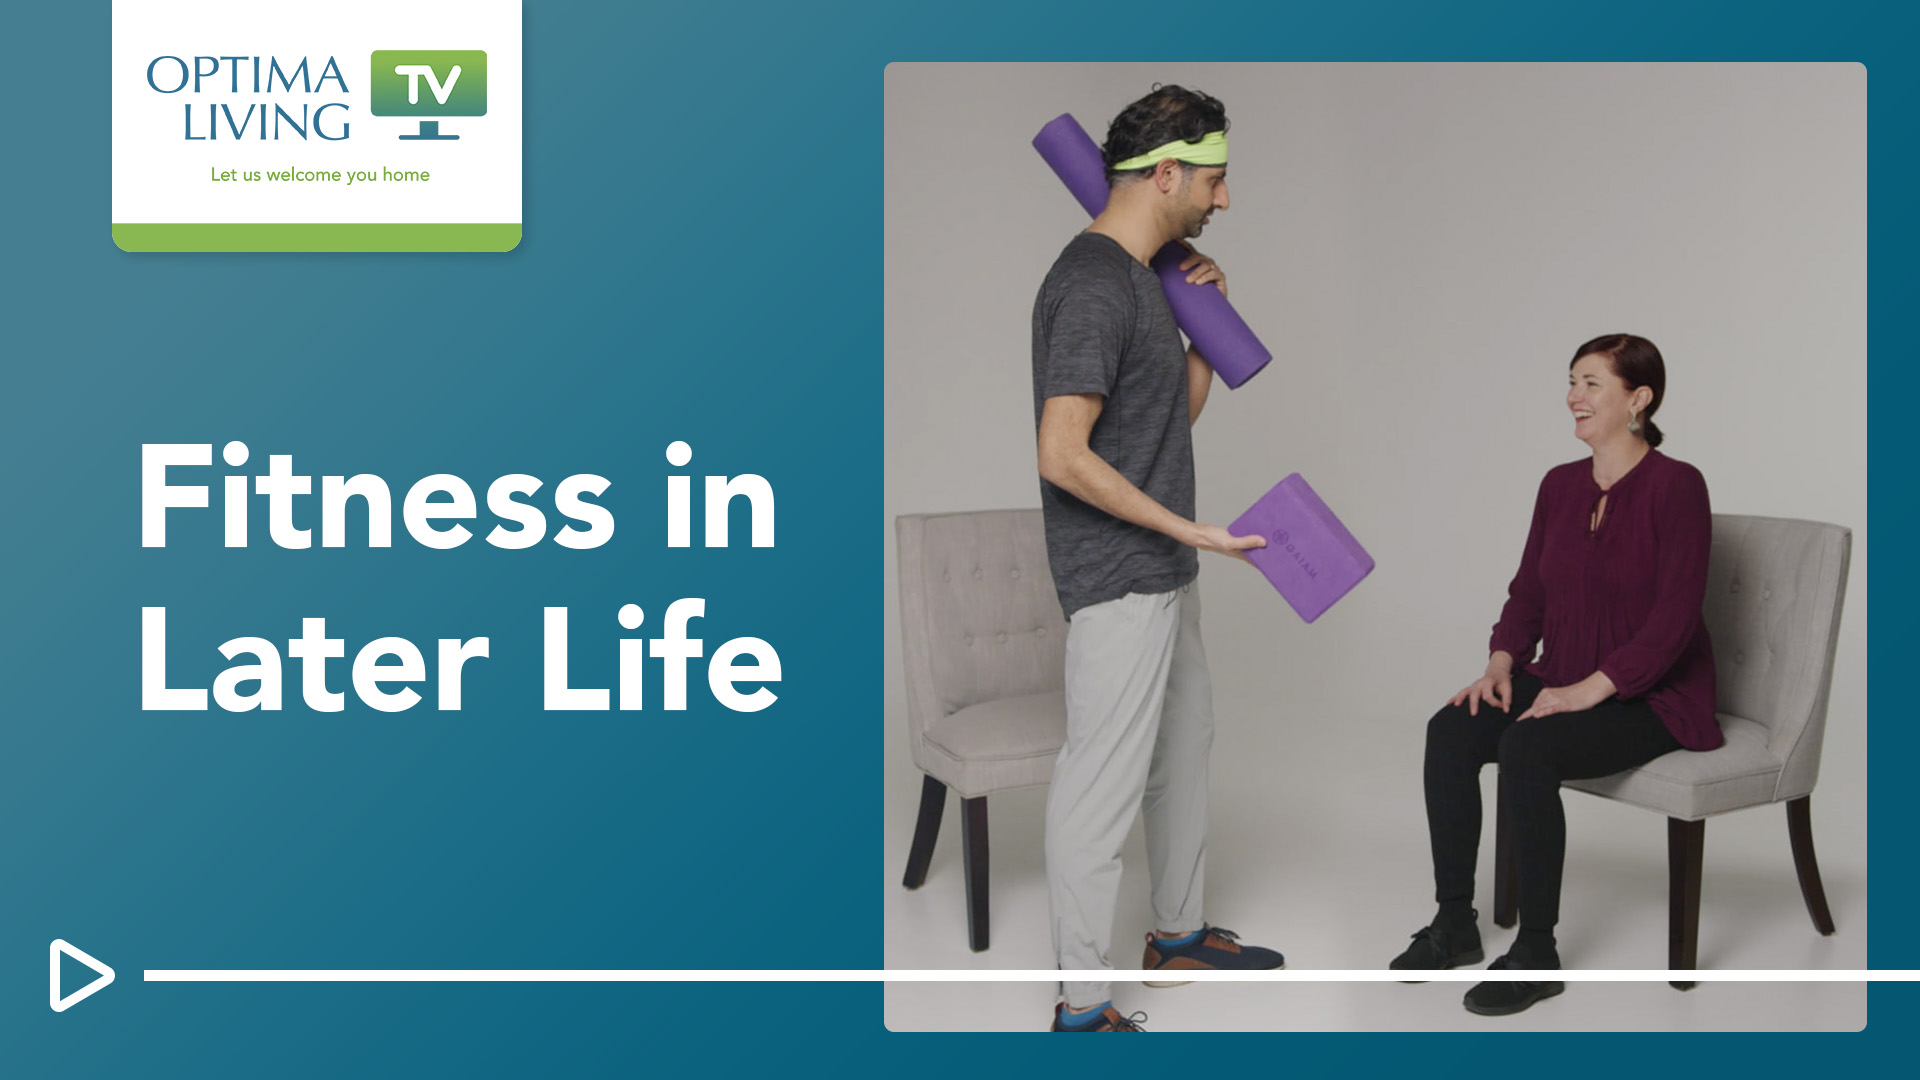 Optima Living TV Fitness in Later Life header with a picture of two individuals preparing to discuss physical activity.